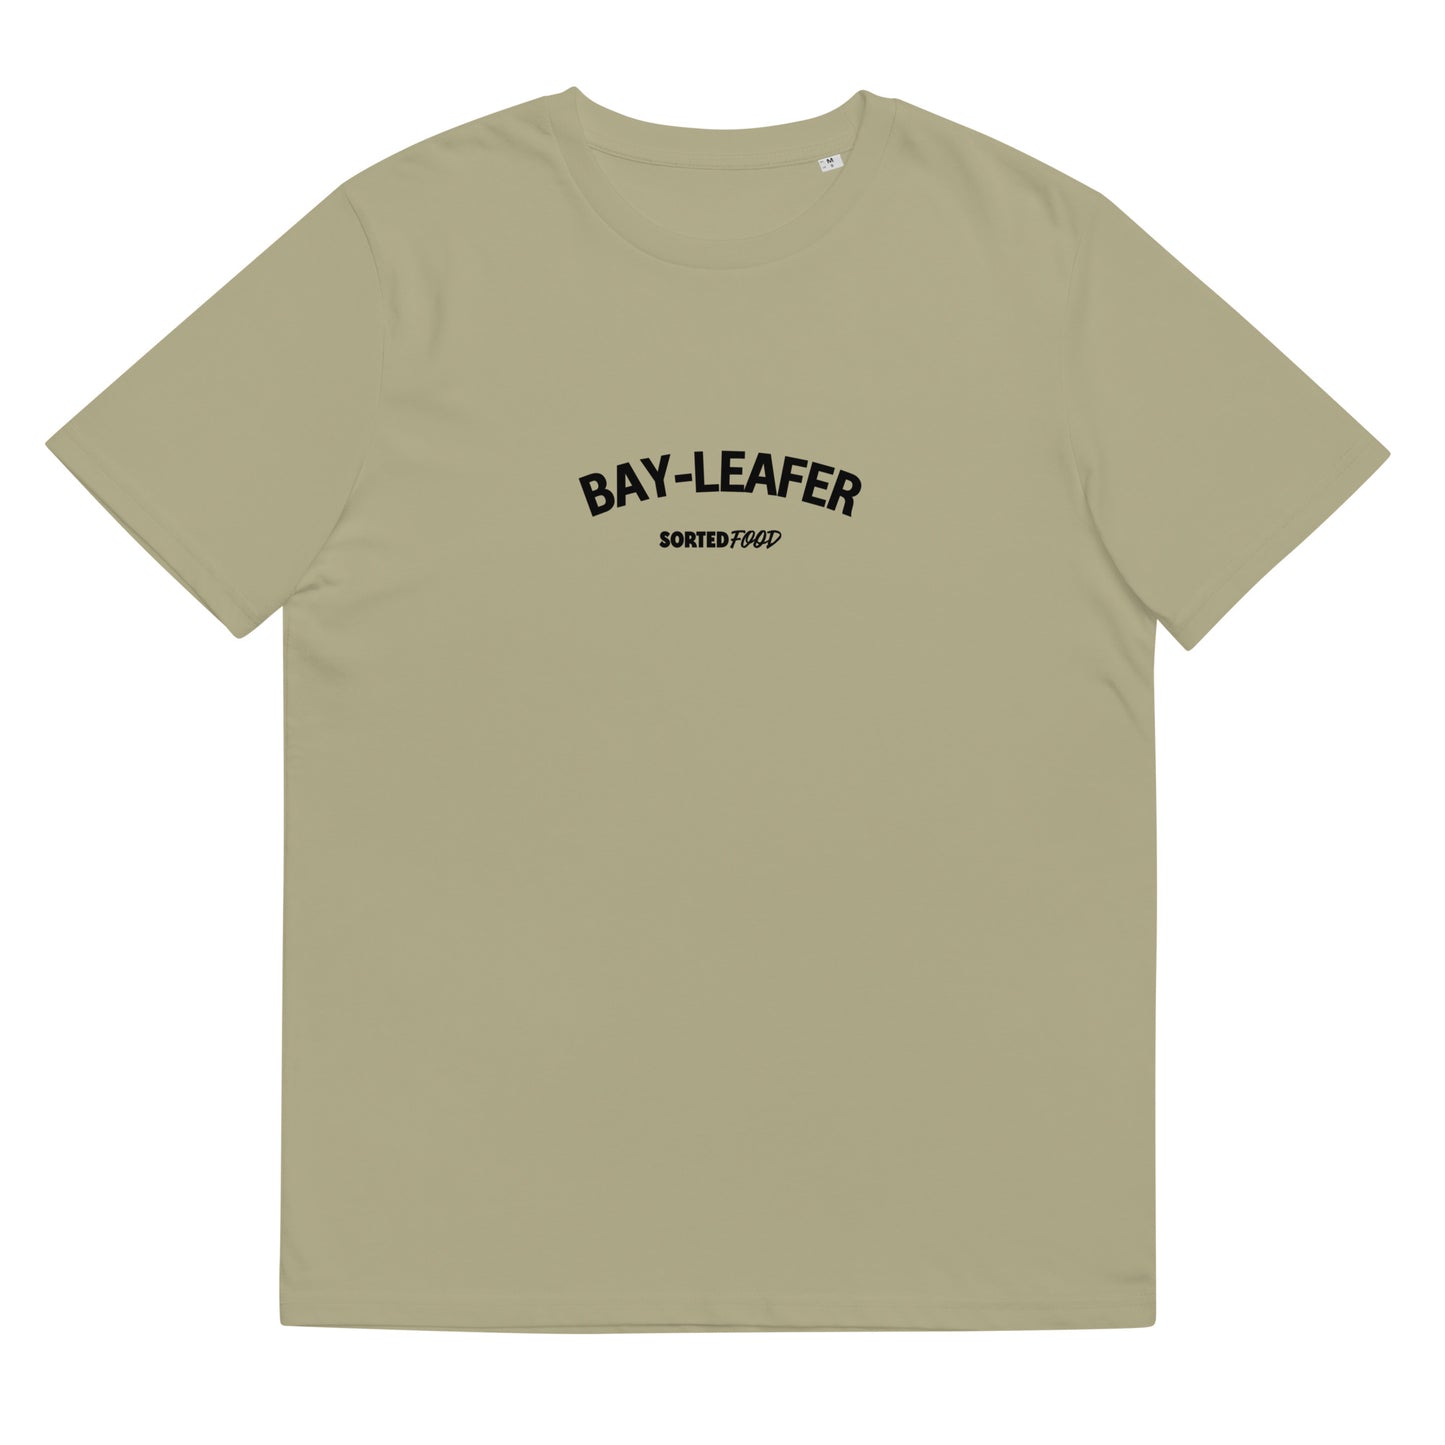 Bay-Leafer Tee